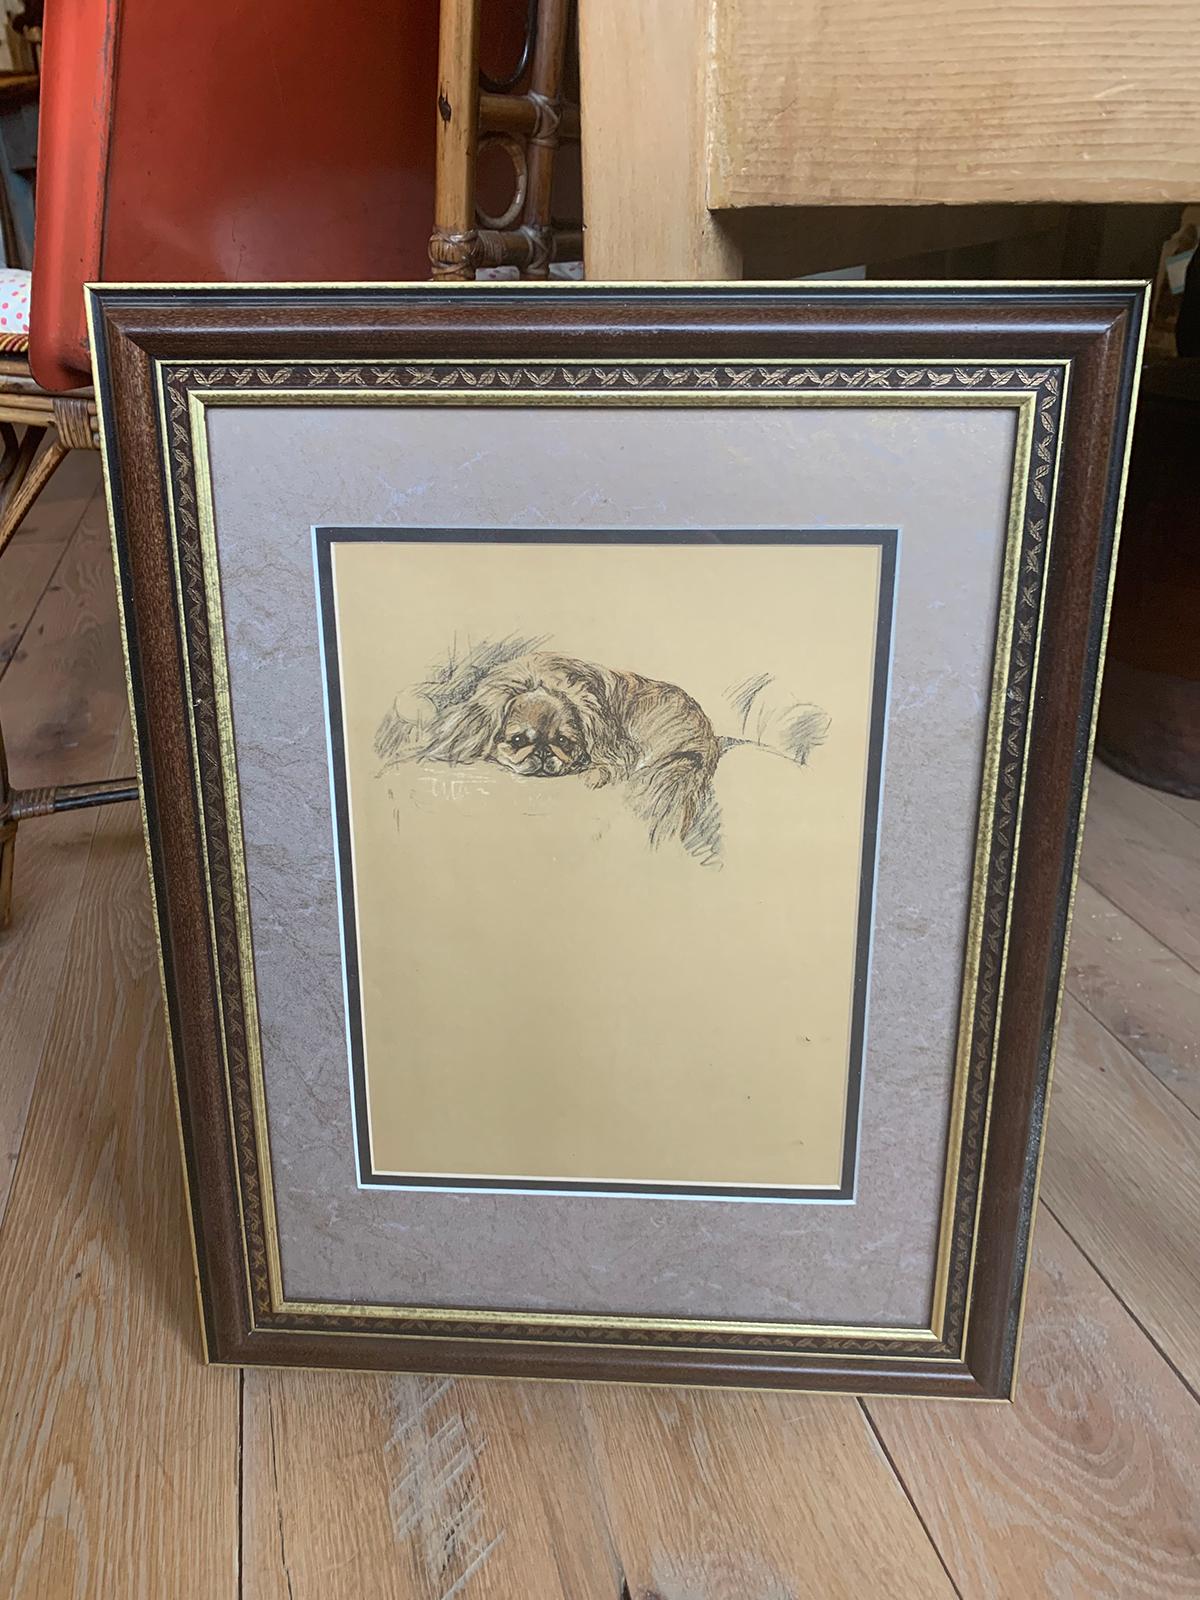 20th century engraving of Pekingese in giltwood frame, unsigned.